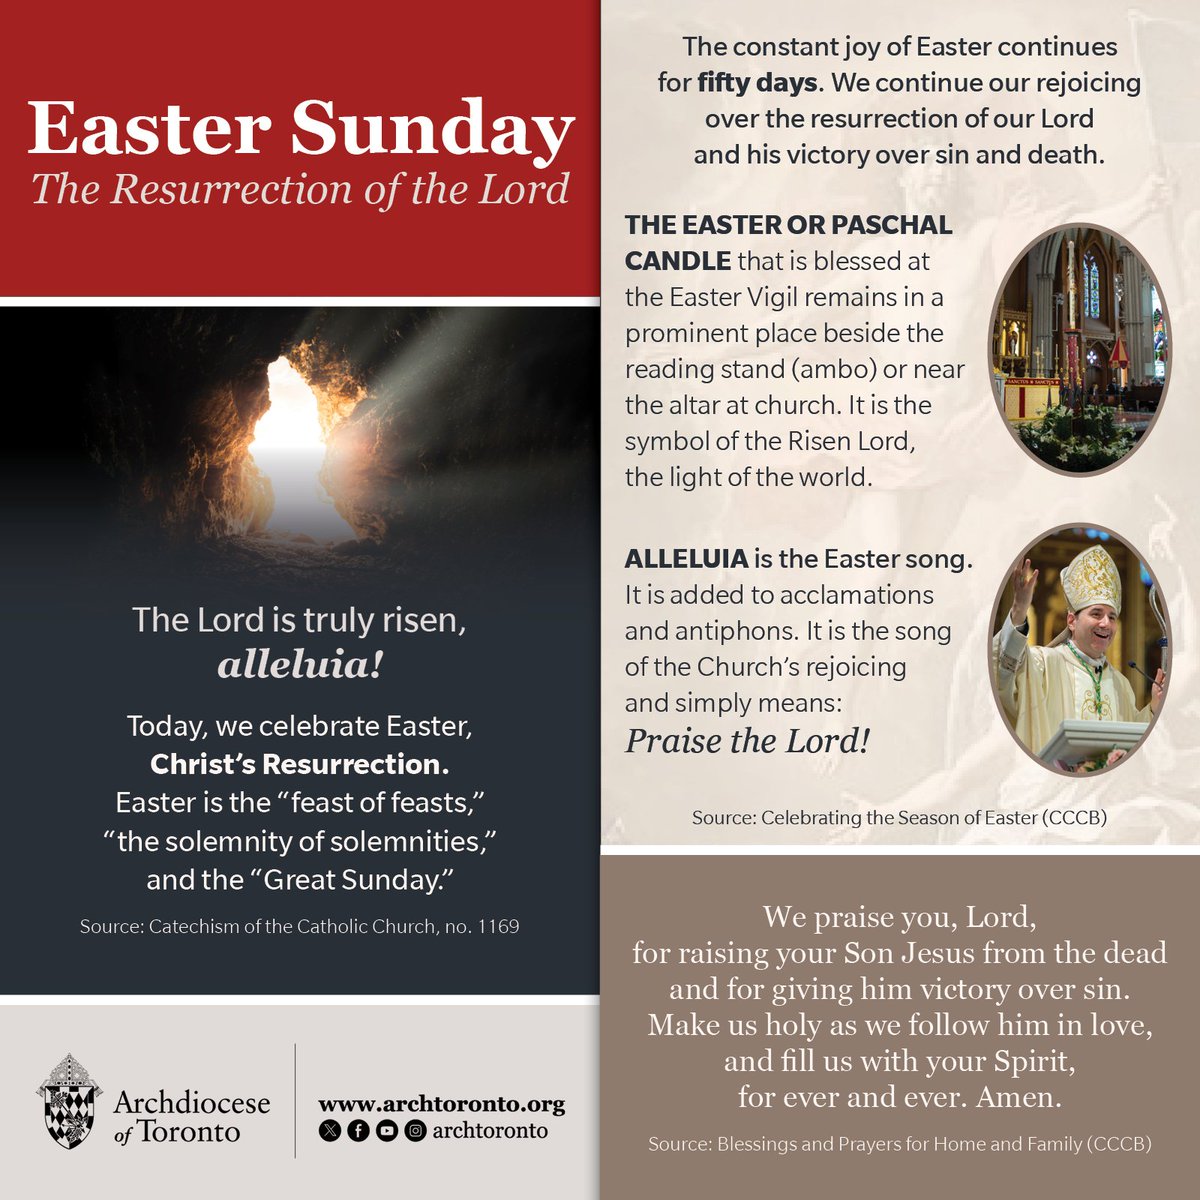 Today, we celebrate #Easter, Christ’s Resurrection. Easter is the 'feast of feasts,' 'the solemnity of solemnities,' and the 'Great Sunday.' Alleluia!